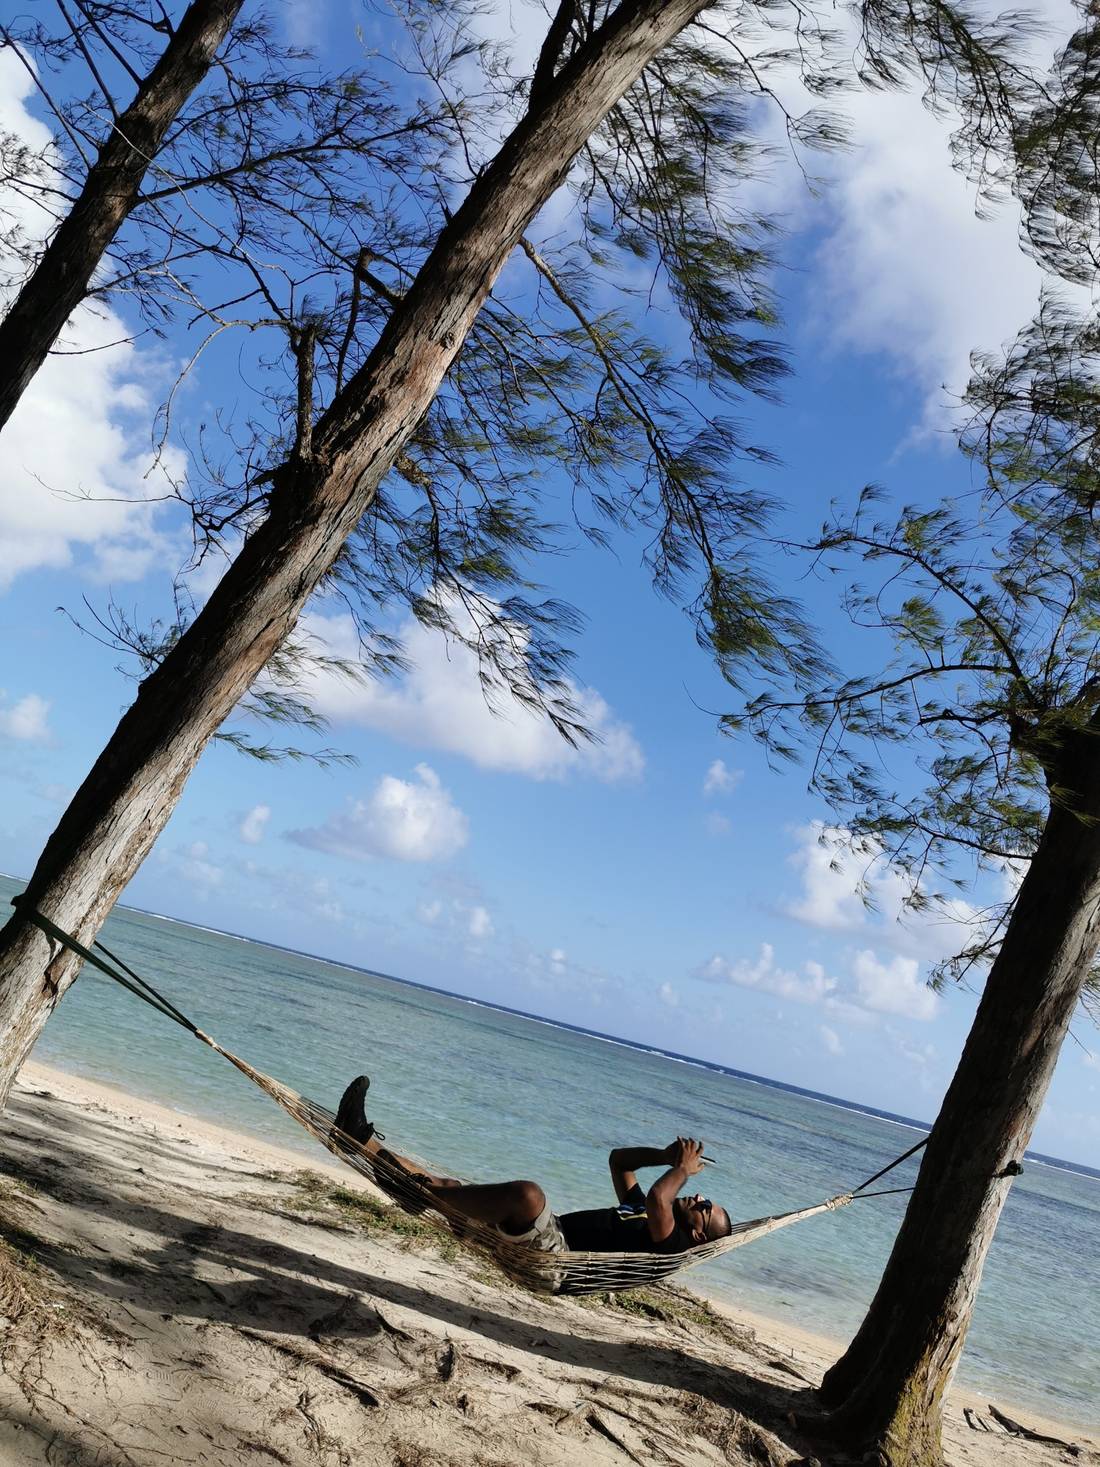 Lay down and relax while enjoying the amazing view in the southern part of the island!